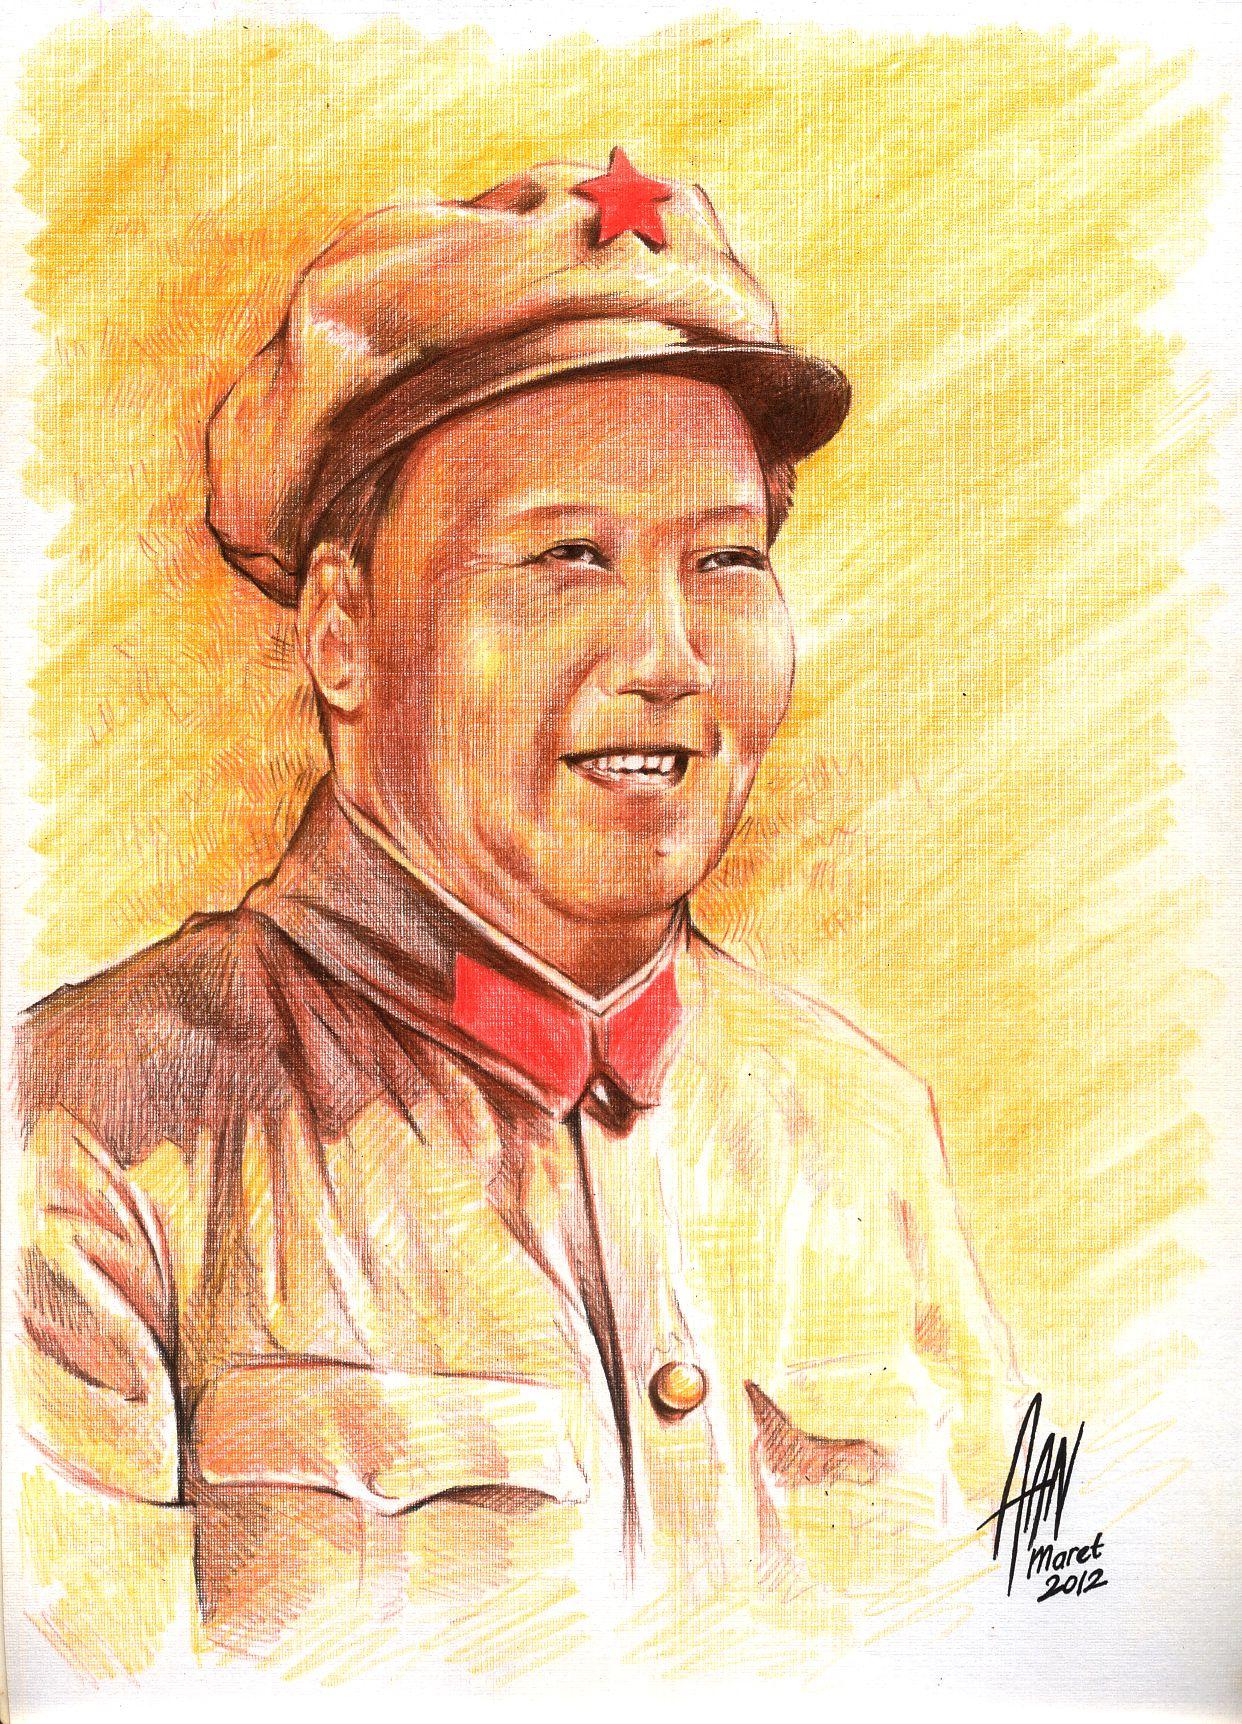 Pin Mao Zedong And His Maniacal Prosody